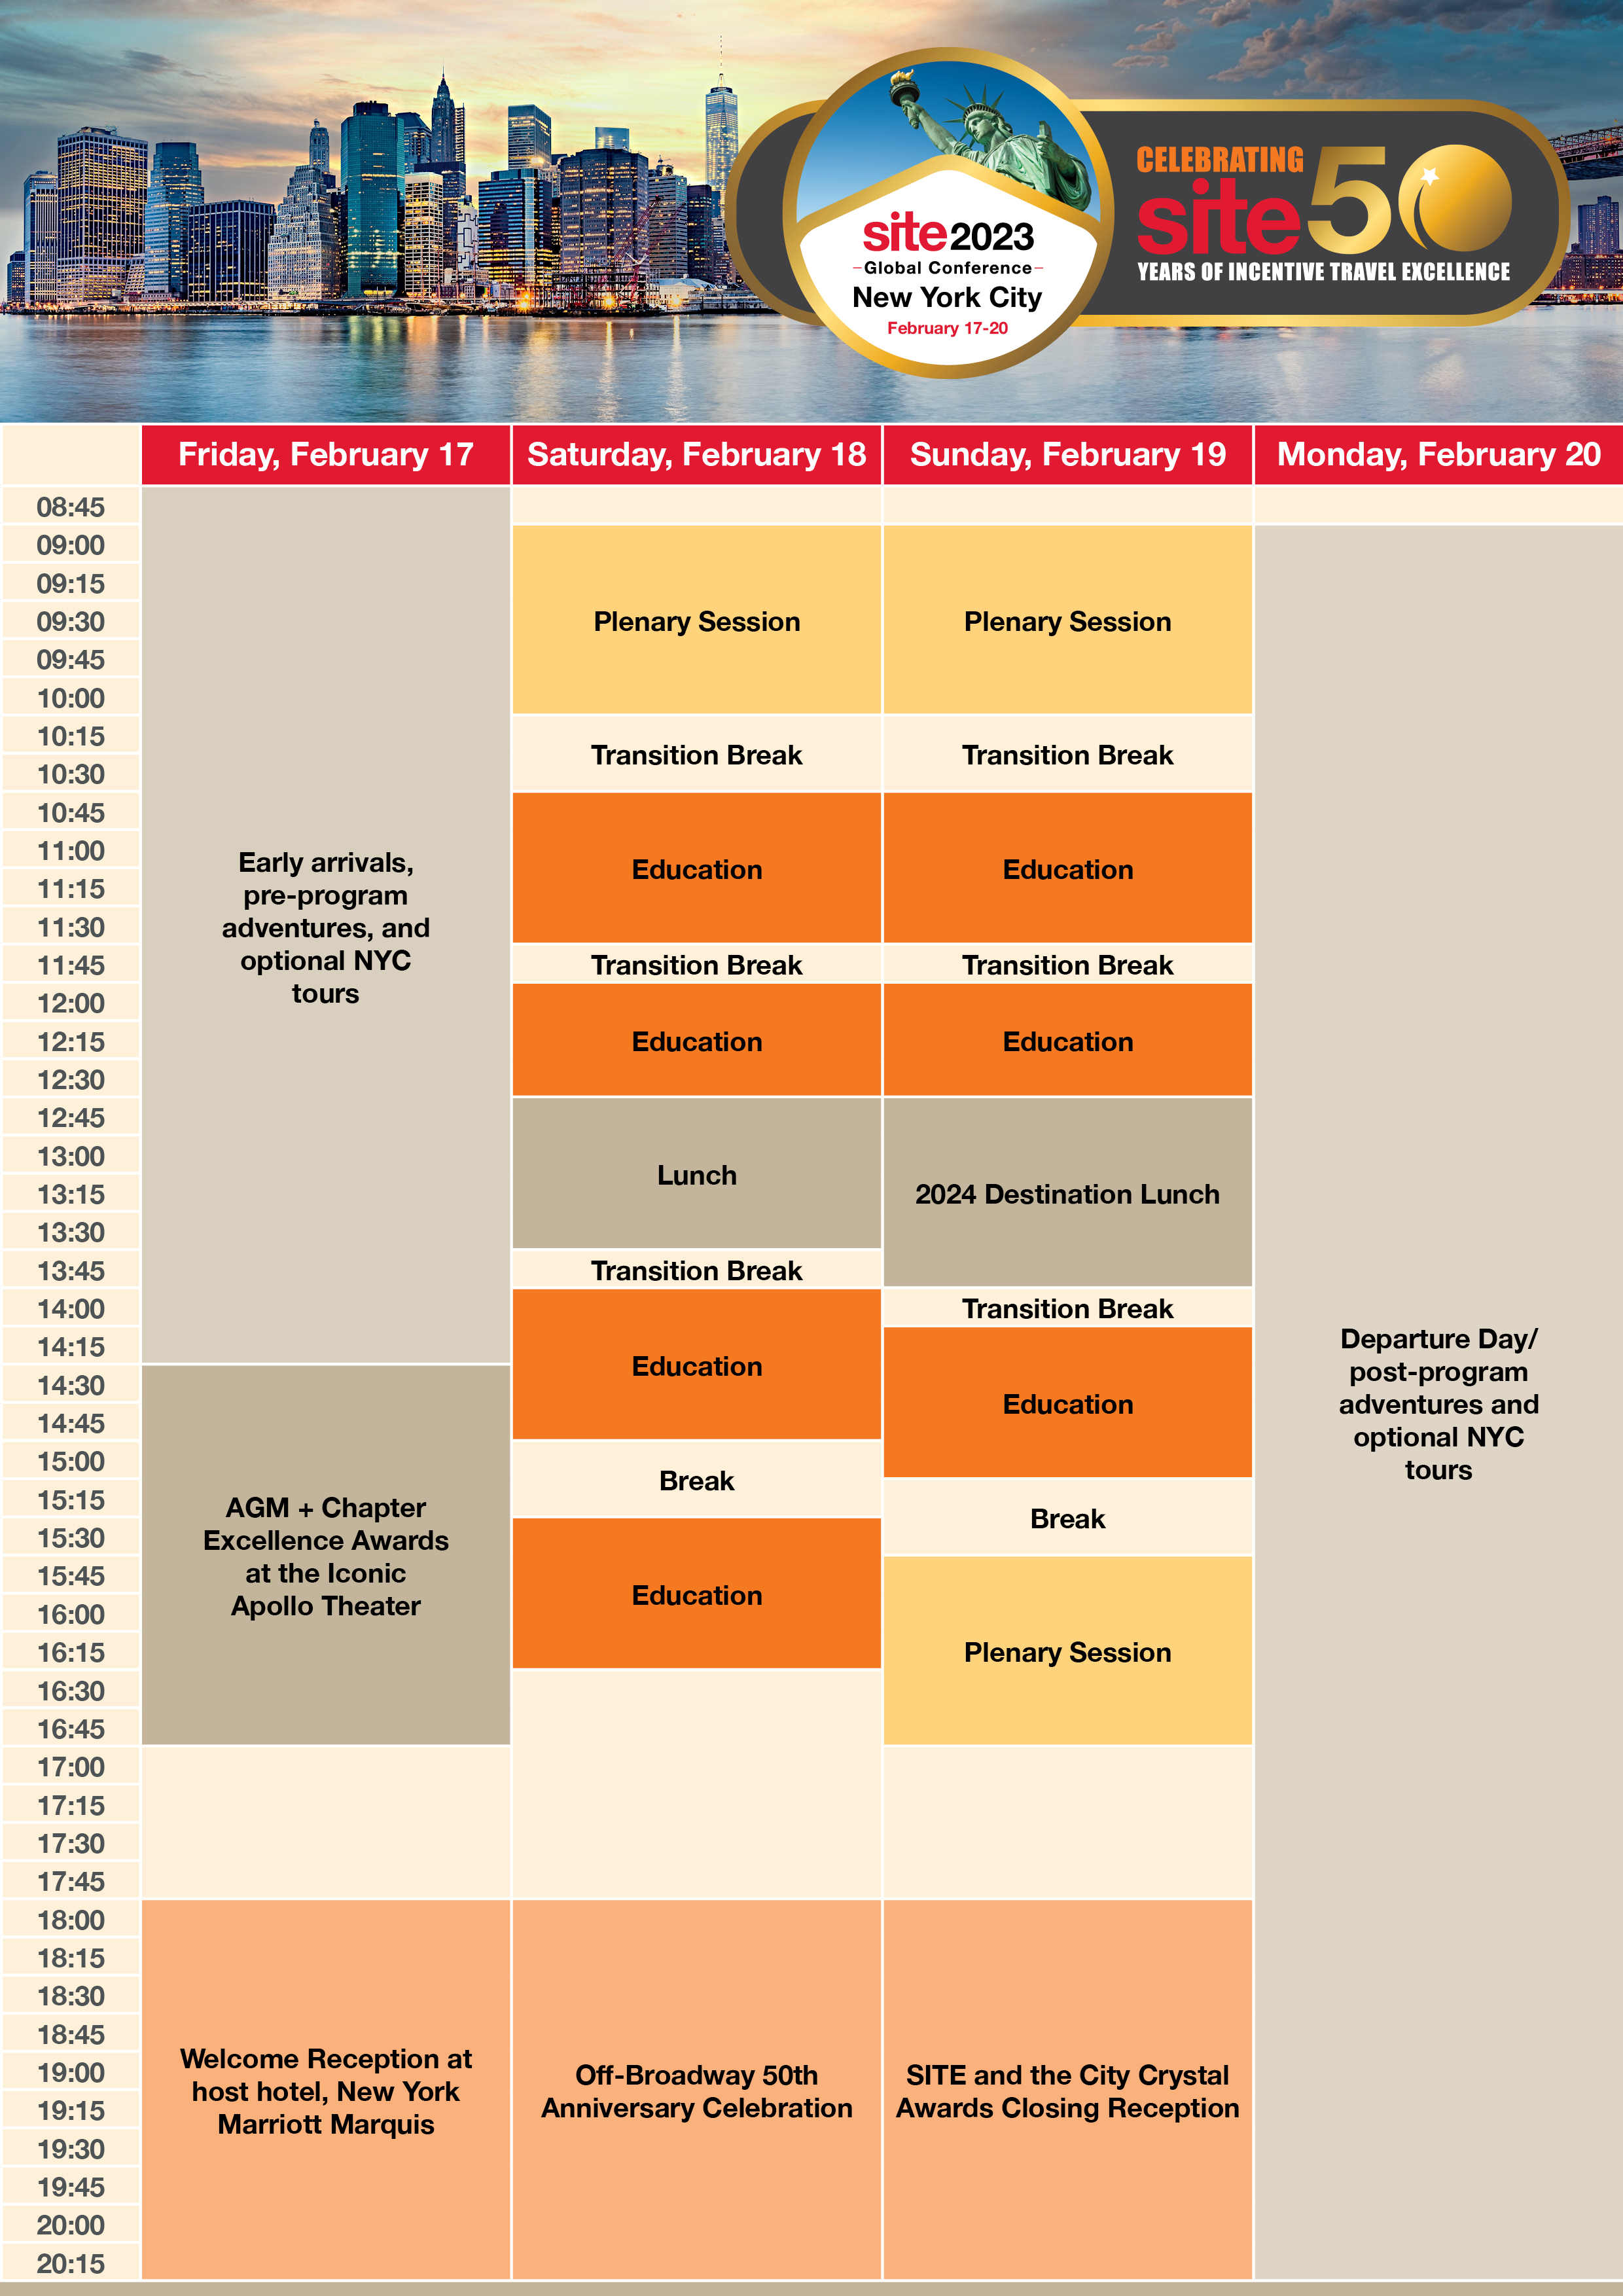 The 2023 SITE Global Conference agenda is listed in block format, with vertical columns for each of the three conference days displayed.